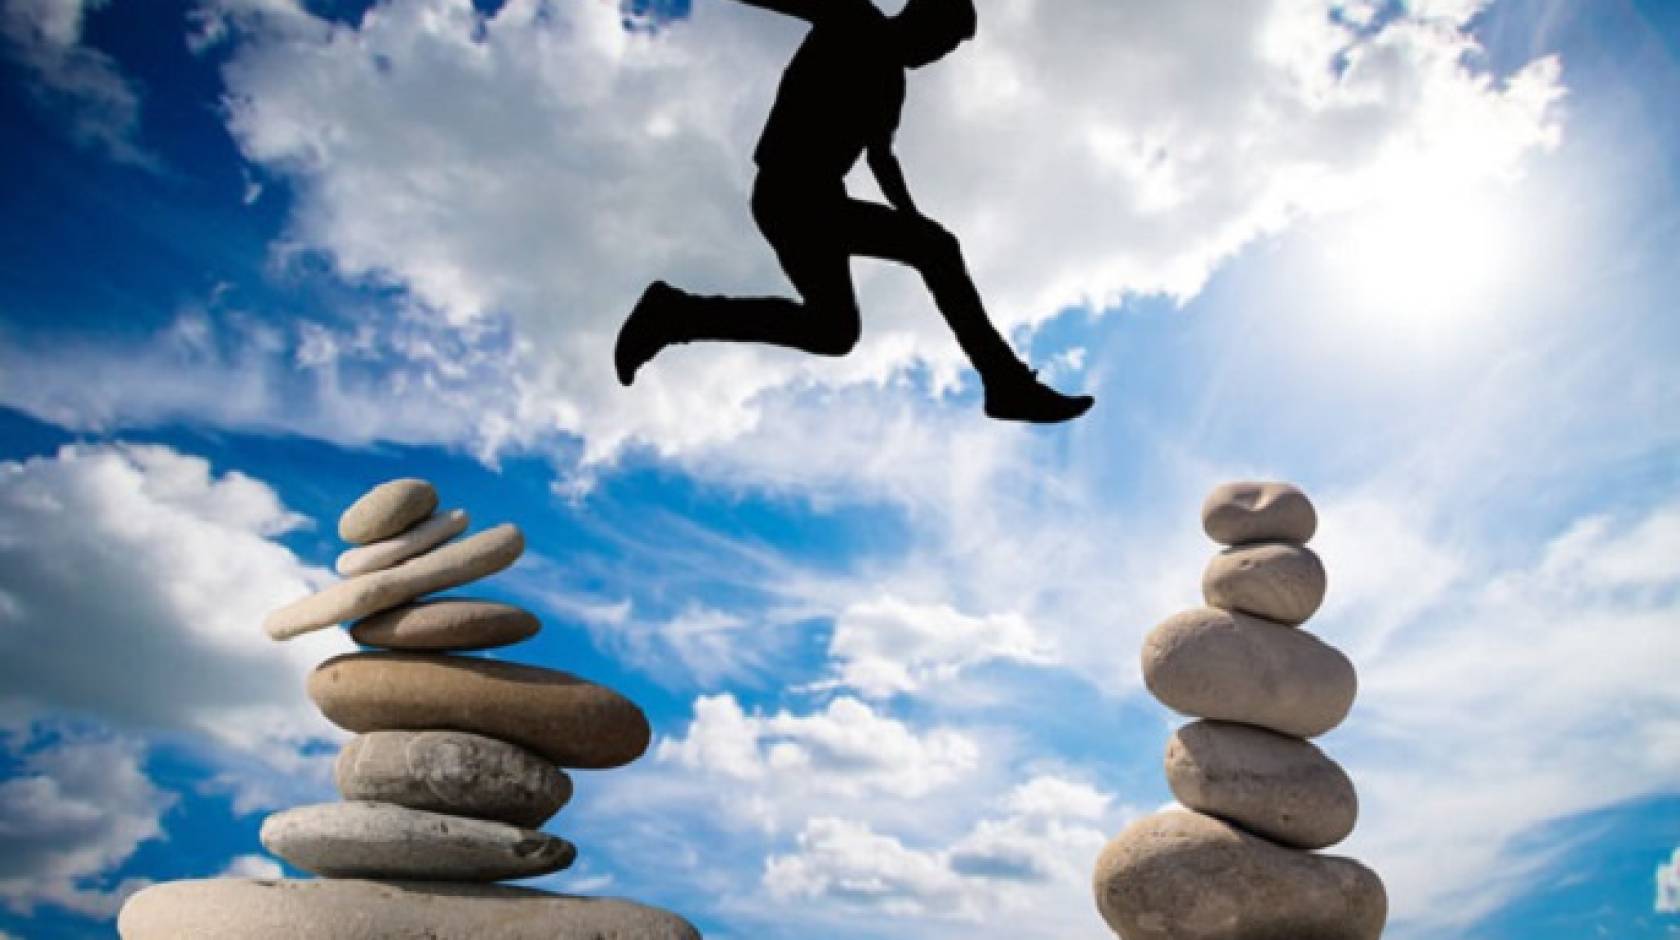 A man jumping over stones